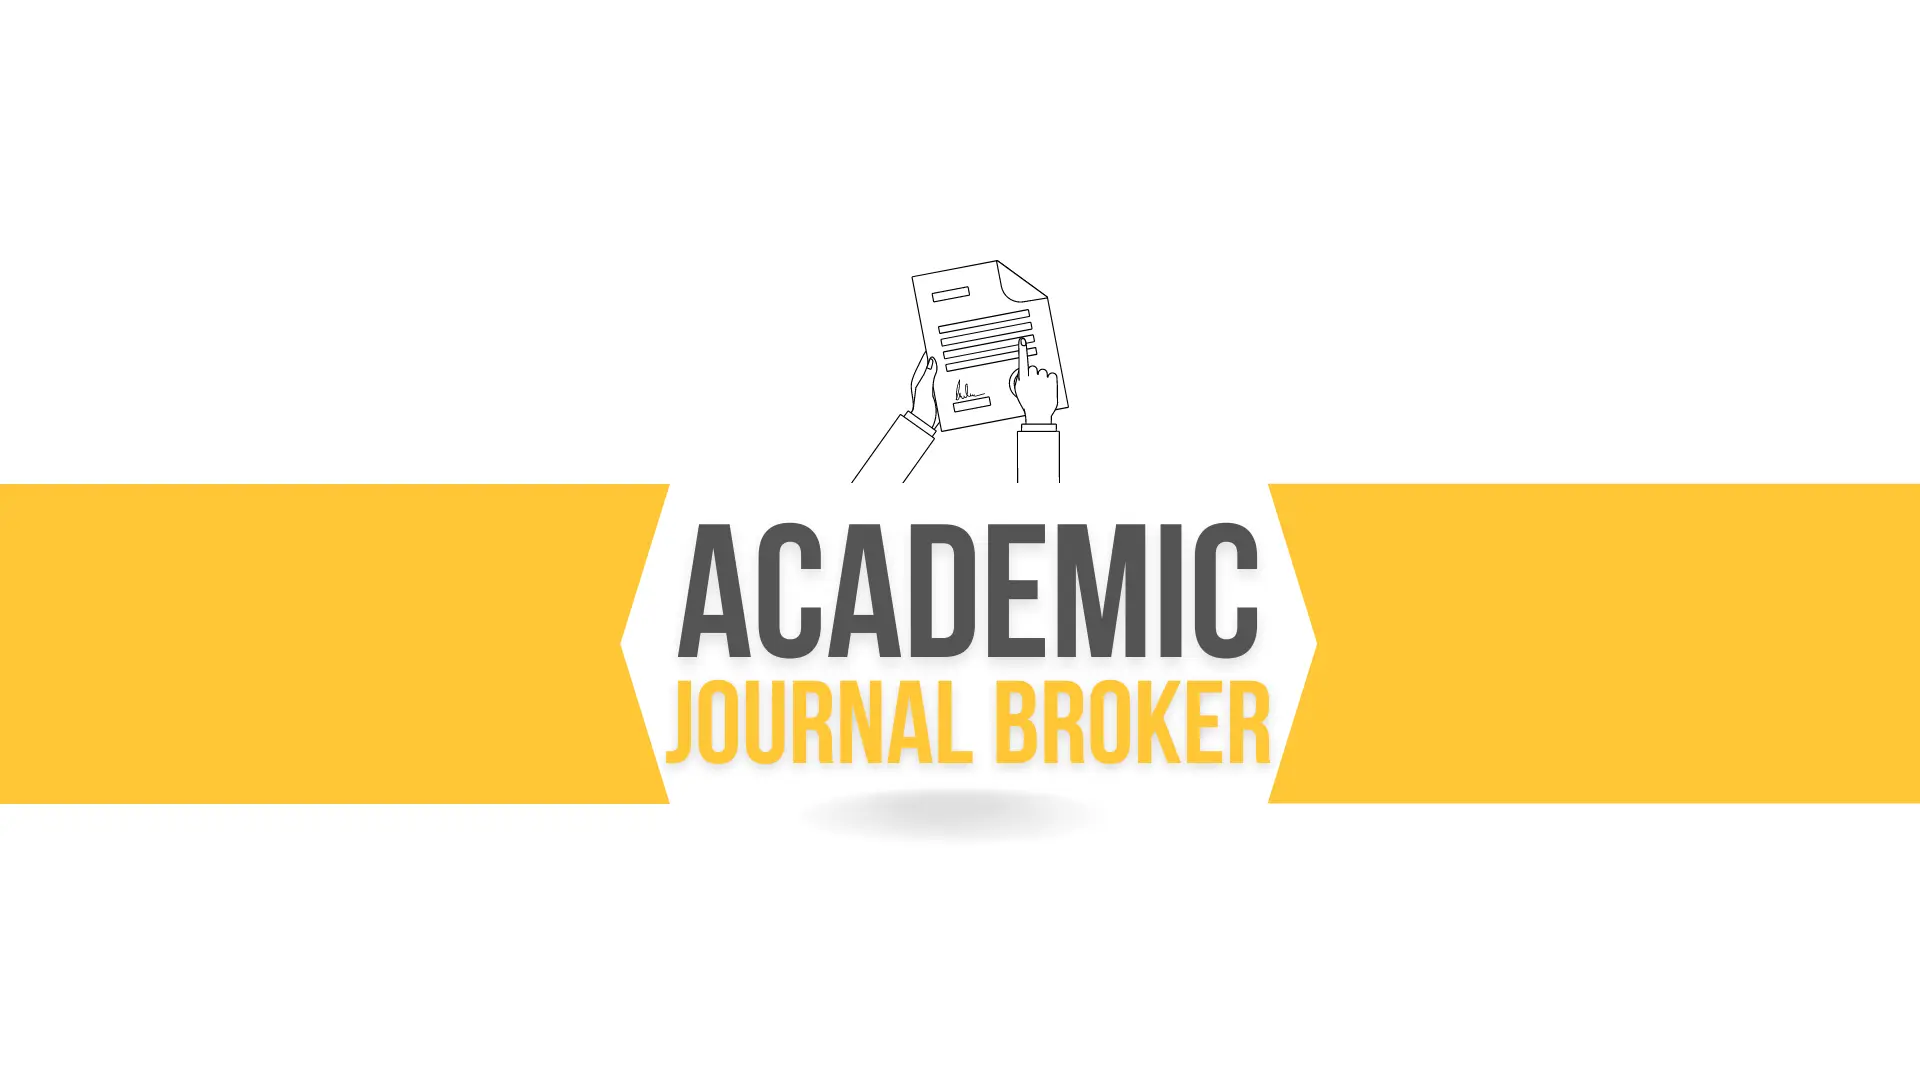 Are you sure you are using academic journal brokers?